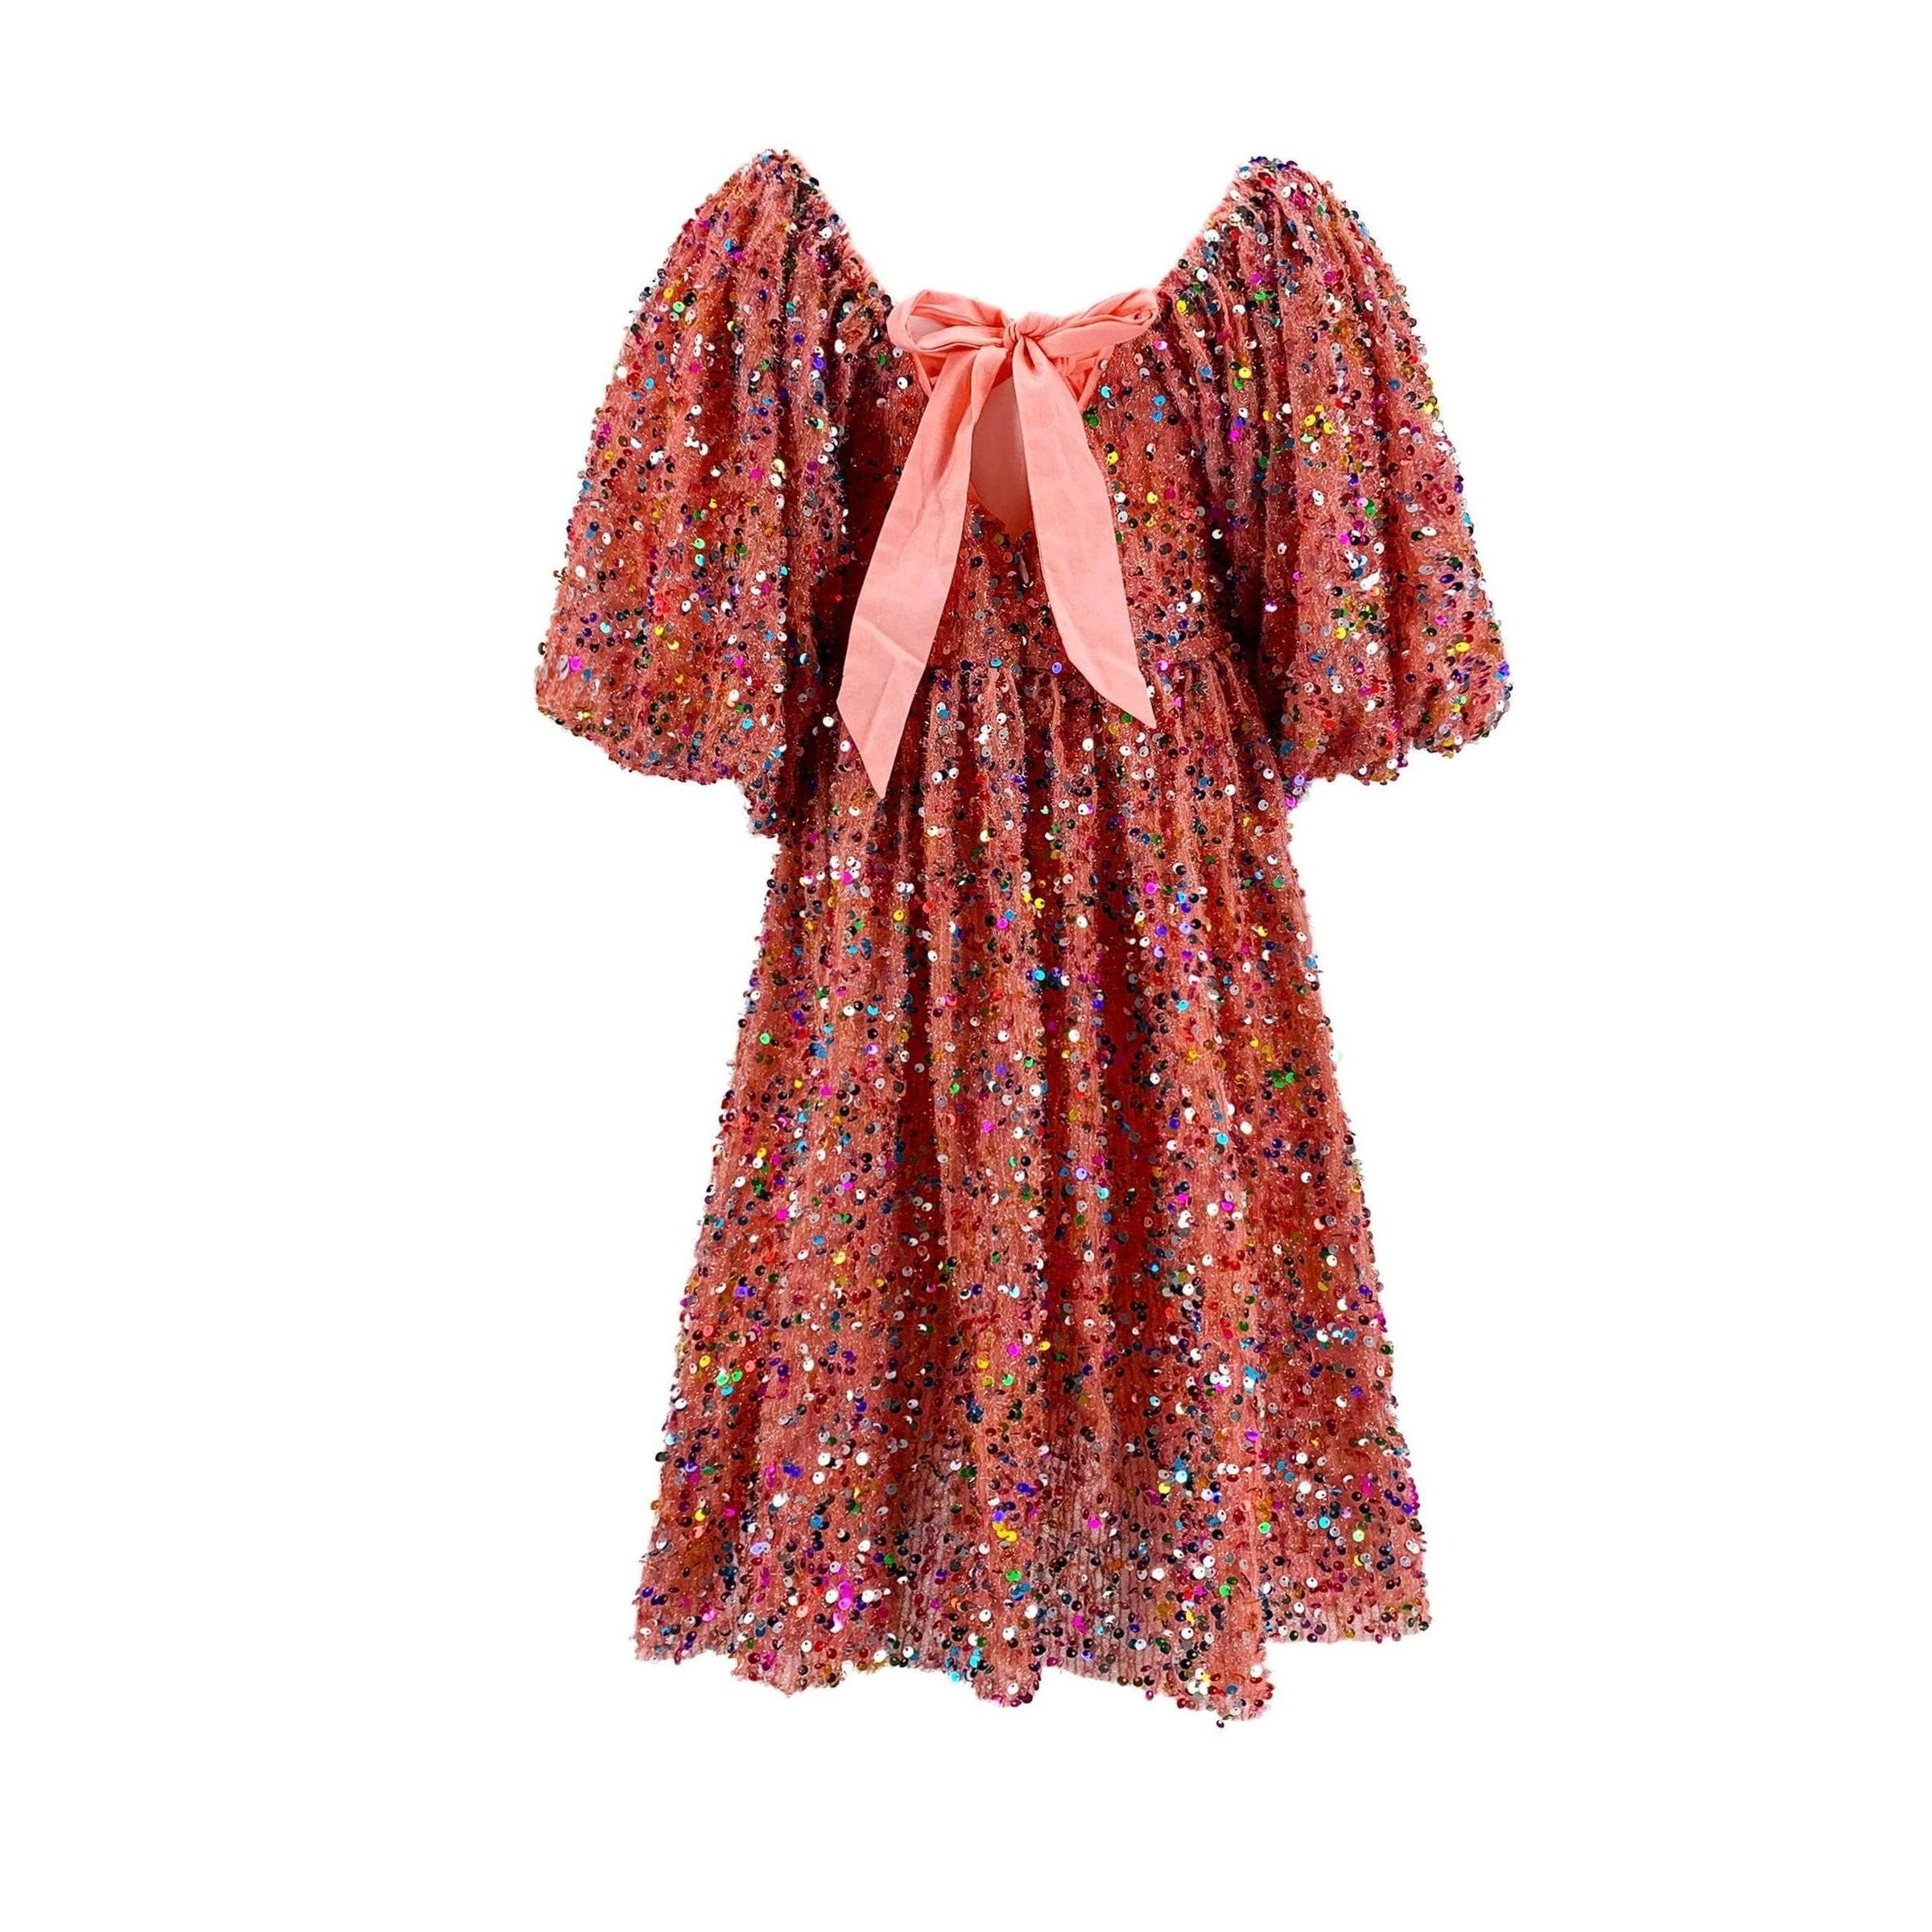 back view of pink puff sleeve dress covered in multicolor sequins and ribbon bow detail